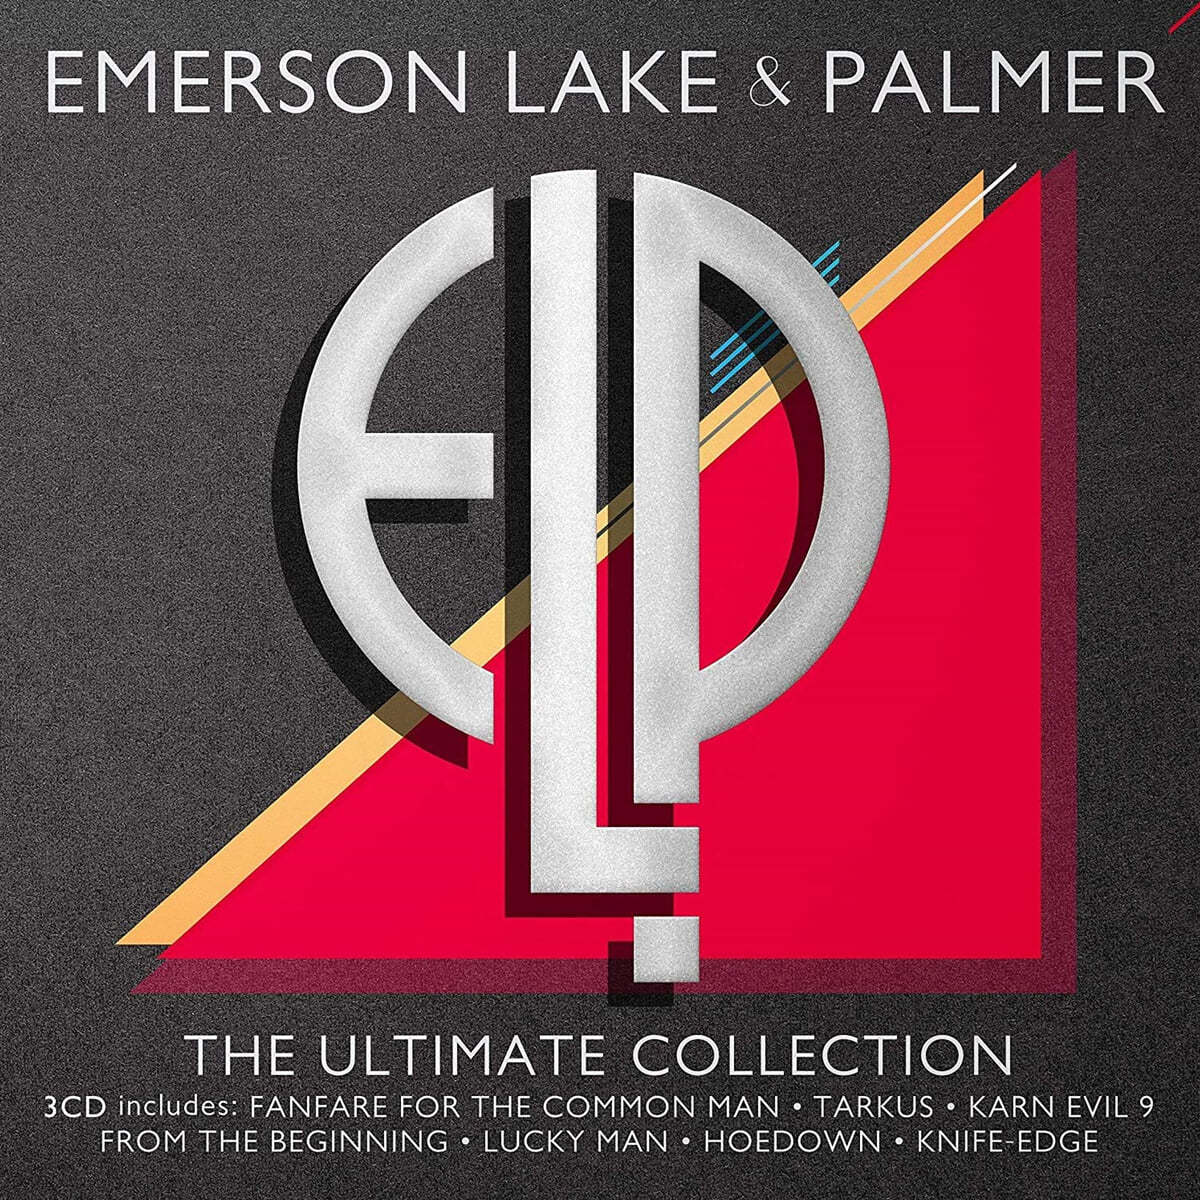 Emerson, Lake &amp; Palmer (에머슨, 레이크 앤 팔머) - The Ultimate Collection 